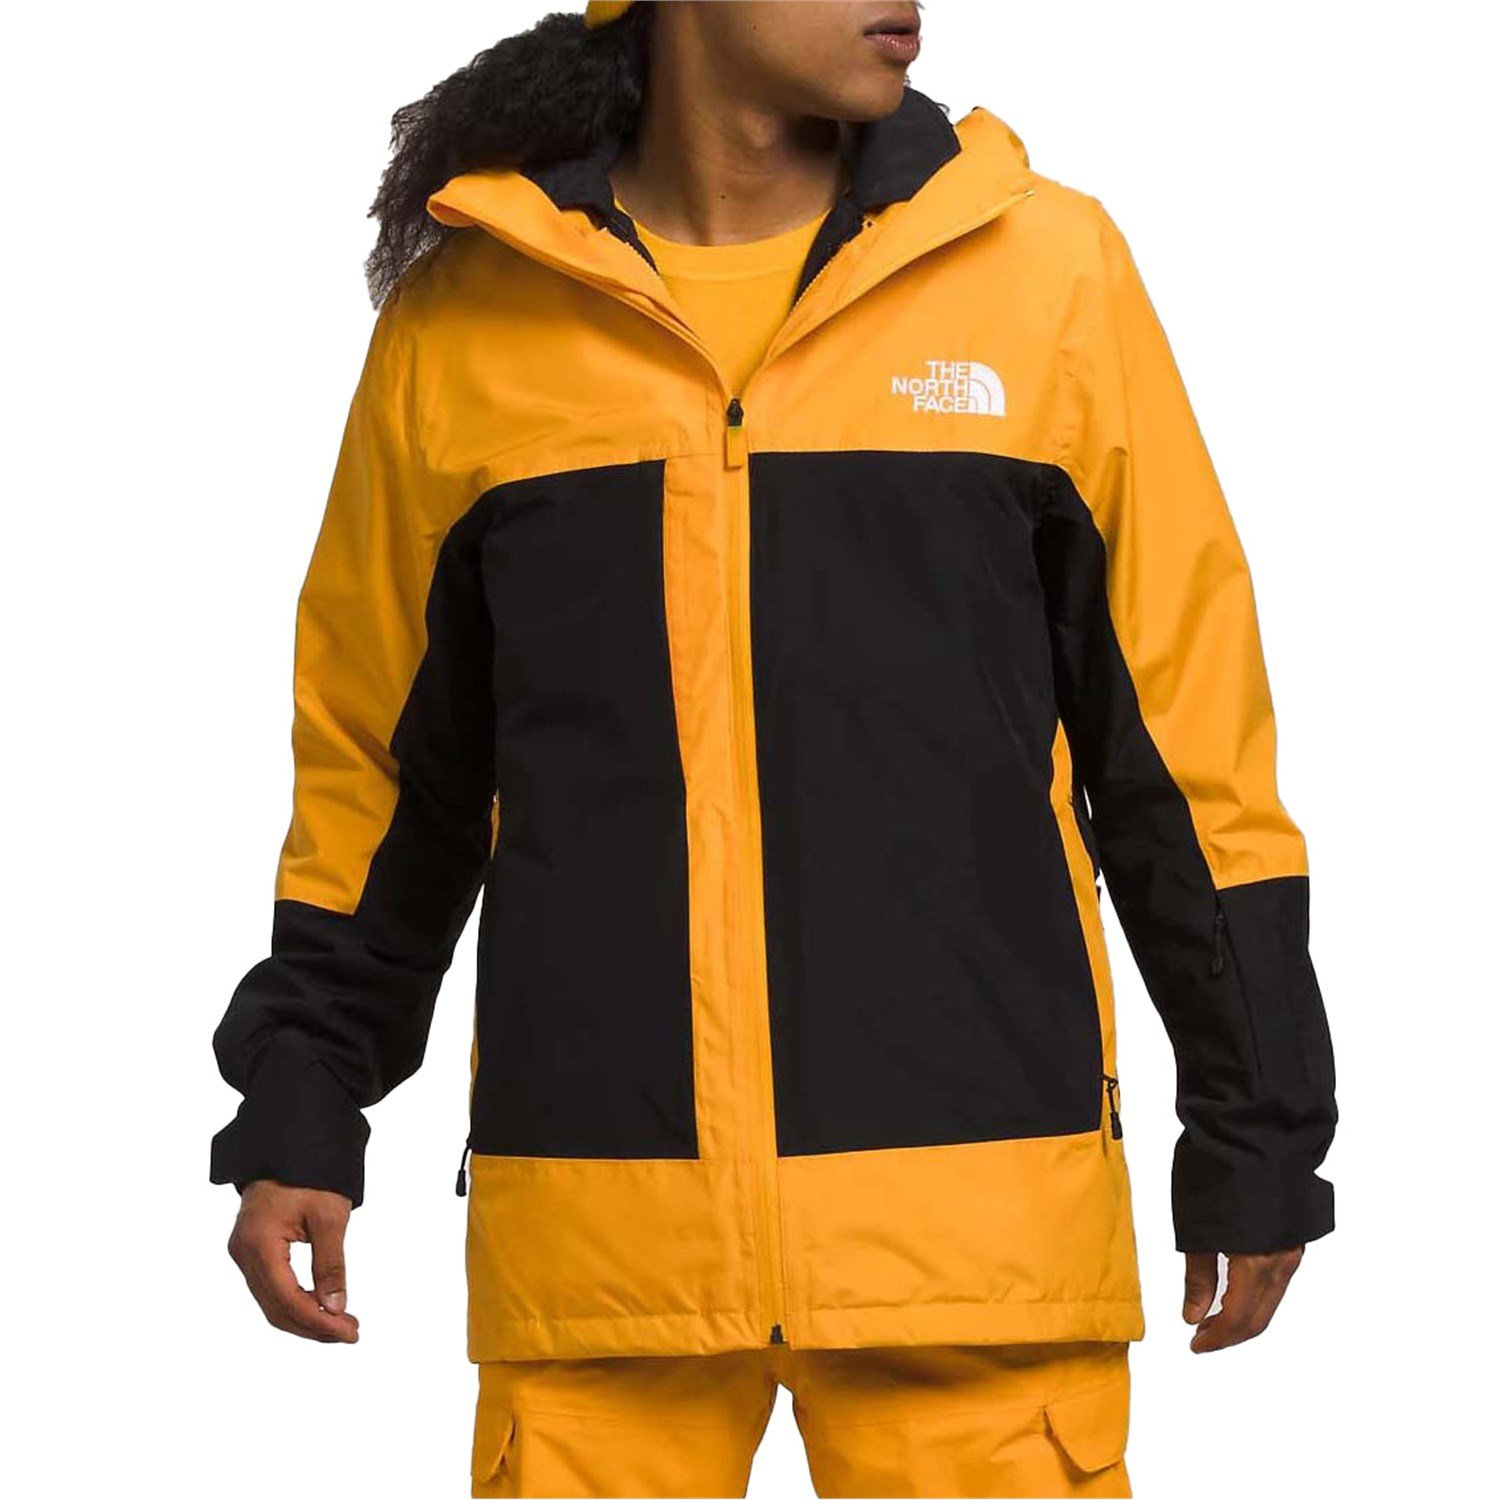 Куртка The North Face ThermoBall Eco Snow Triclimate, цвет Summit Gold куртка thermoball eco snow triclimate мужская the north face цвет cave blue